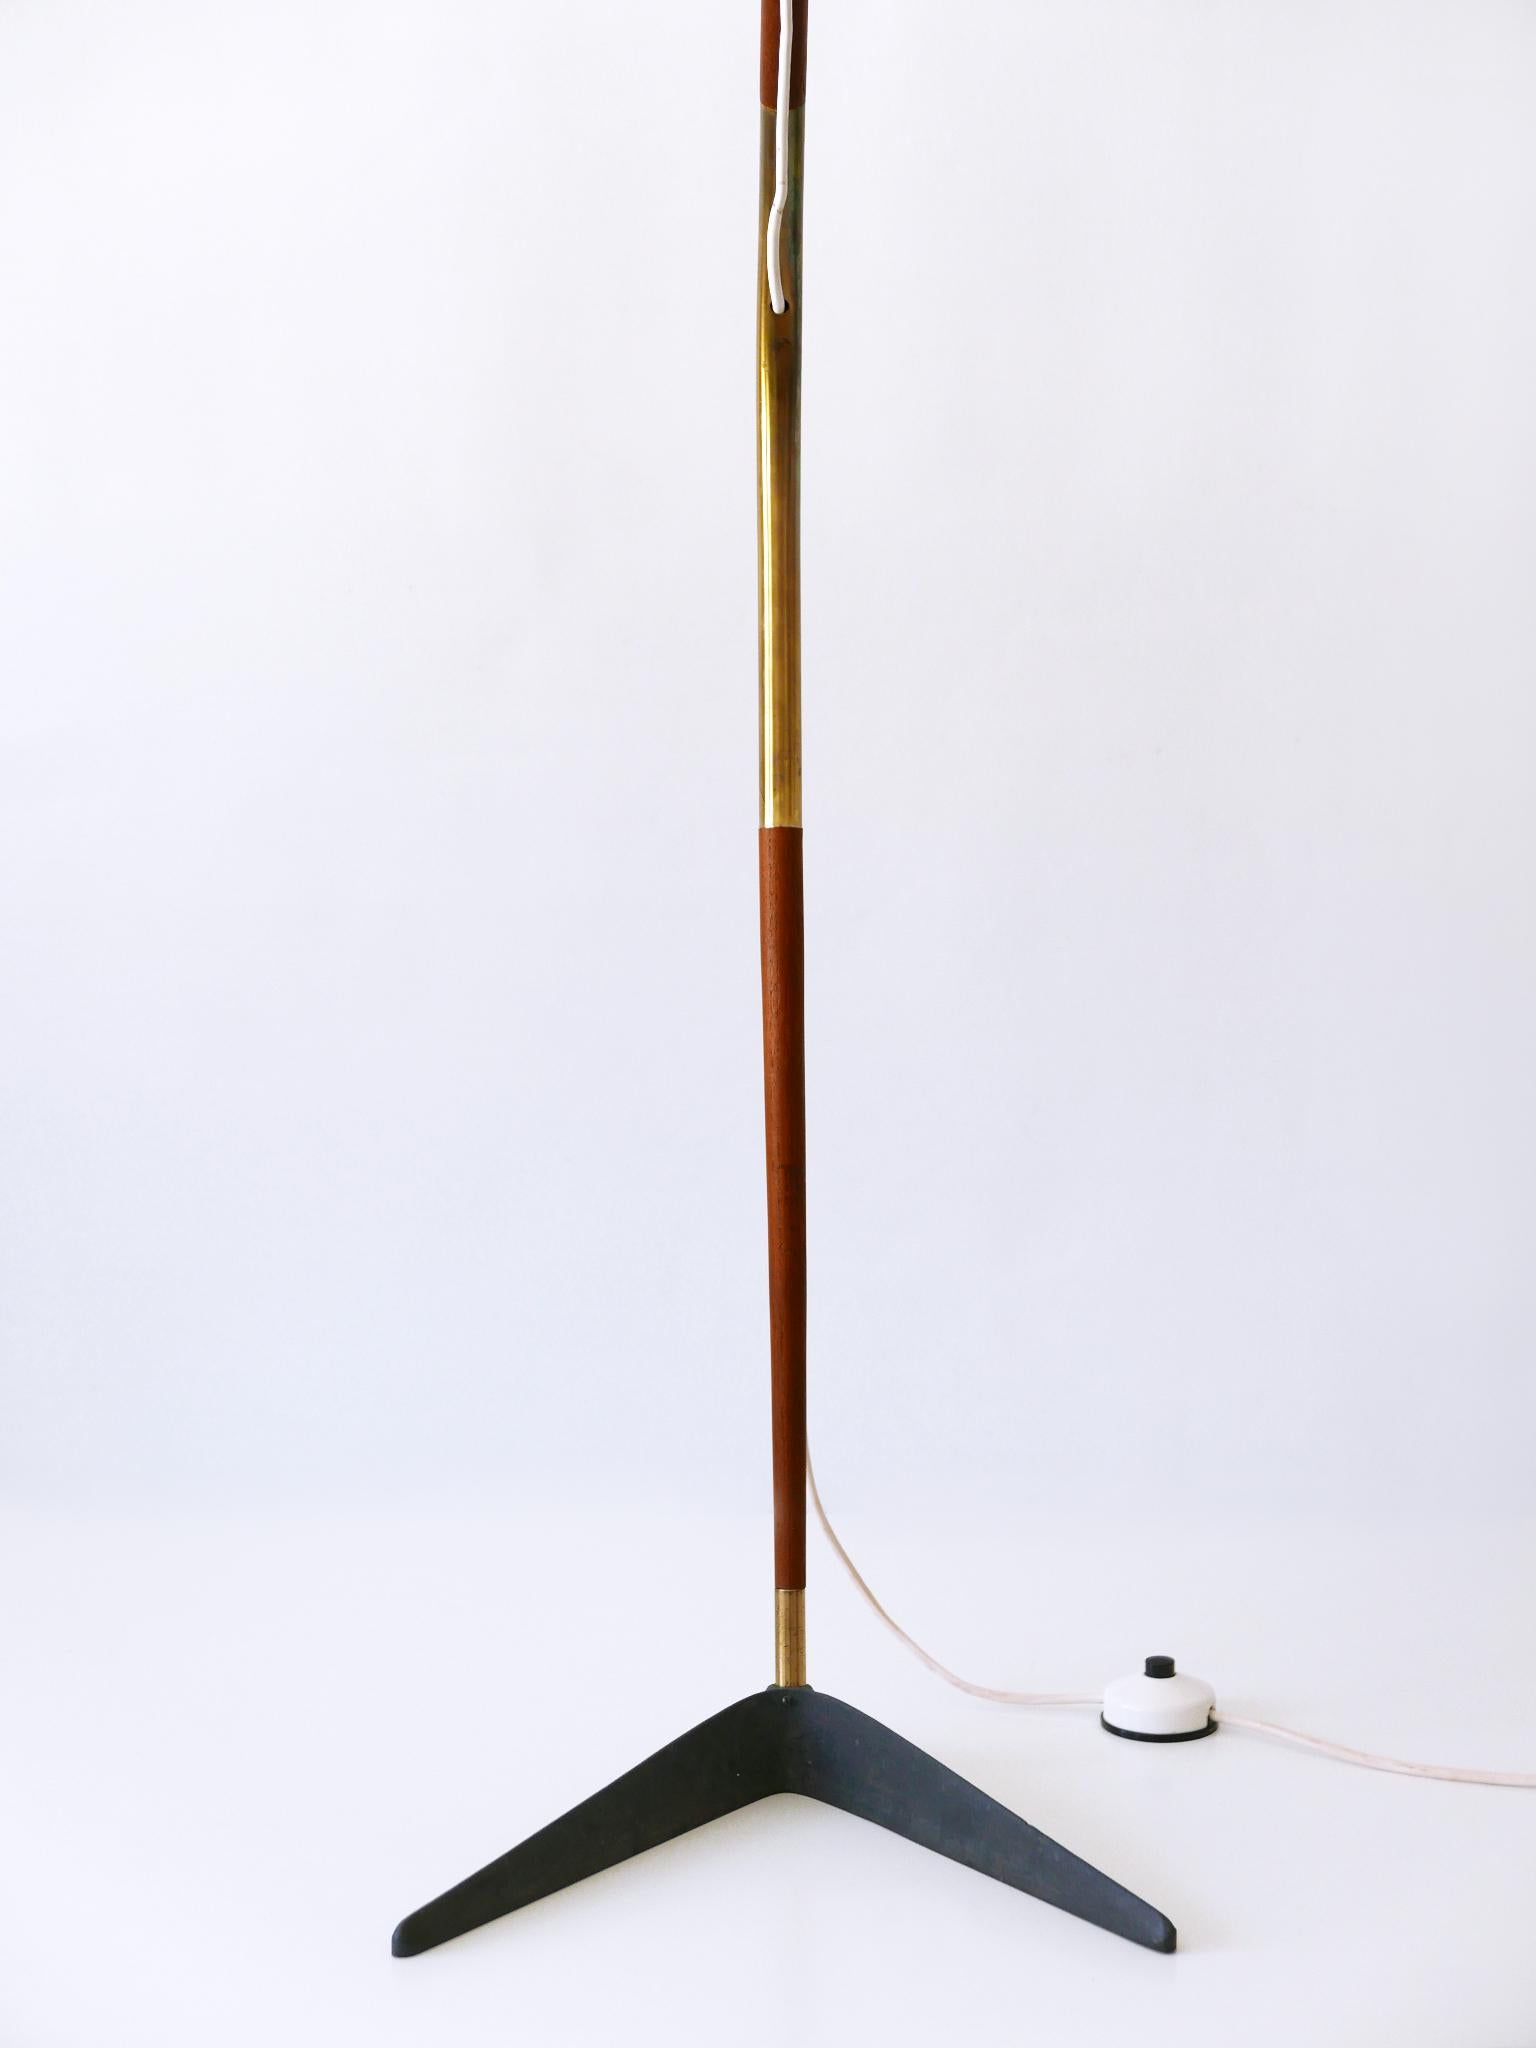 Exceptional 'Fishing Pole' Floor Lamp by Svend Aage Holm Sørensen Denmark 1950s For Sale 8